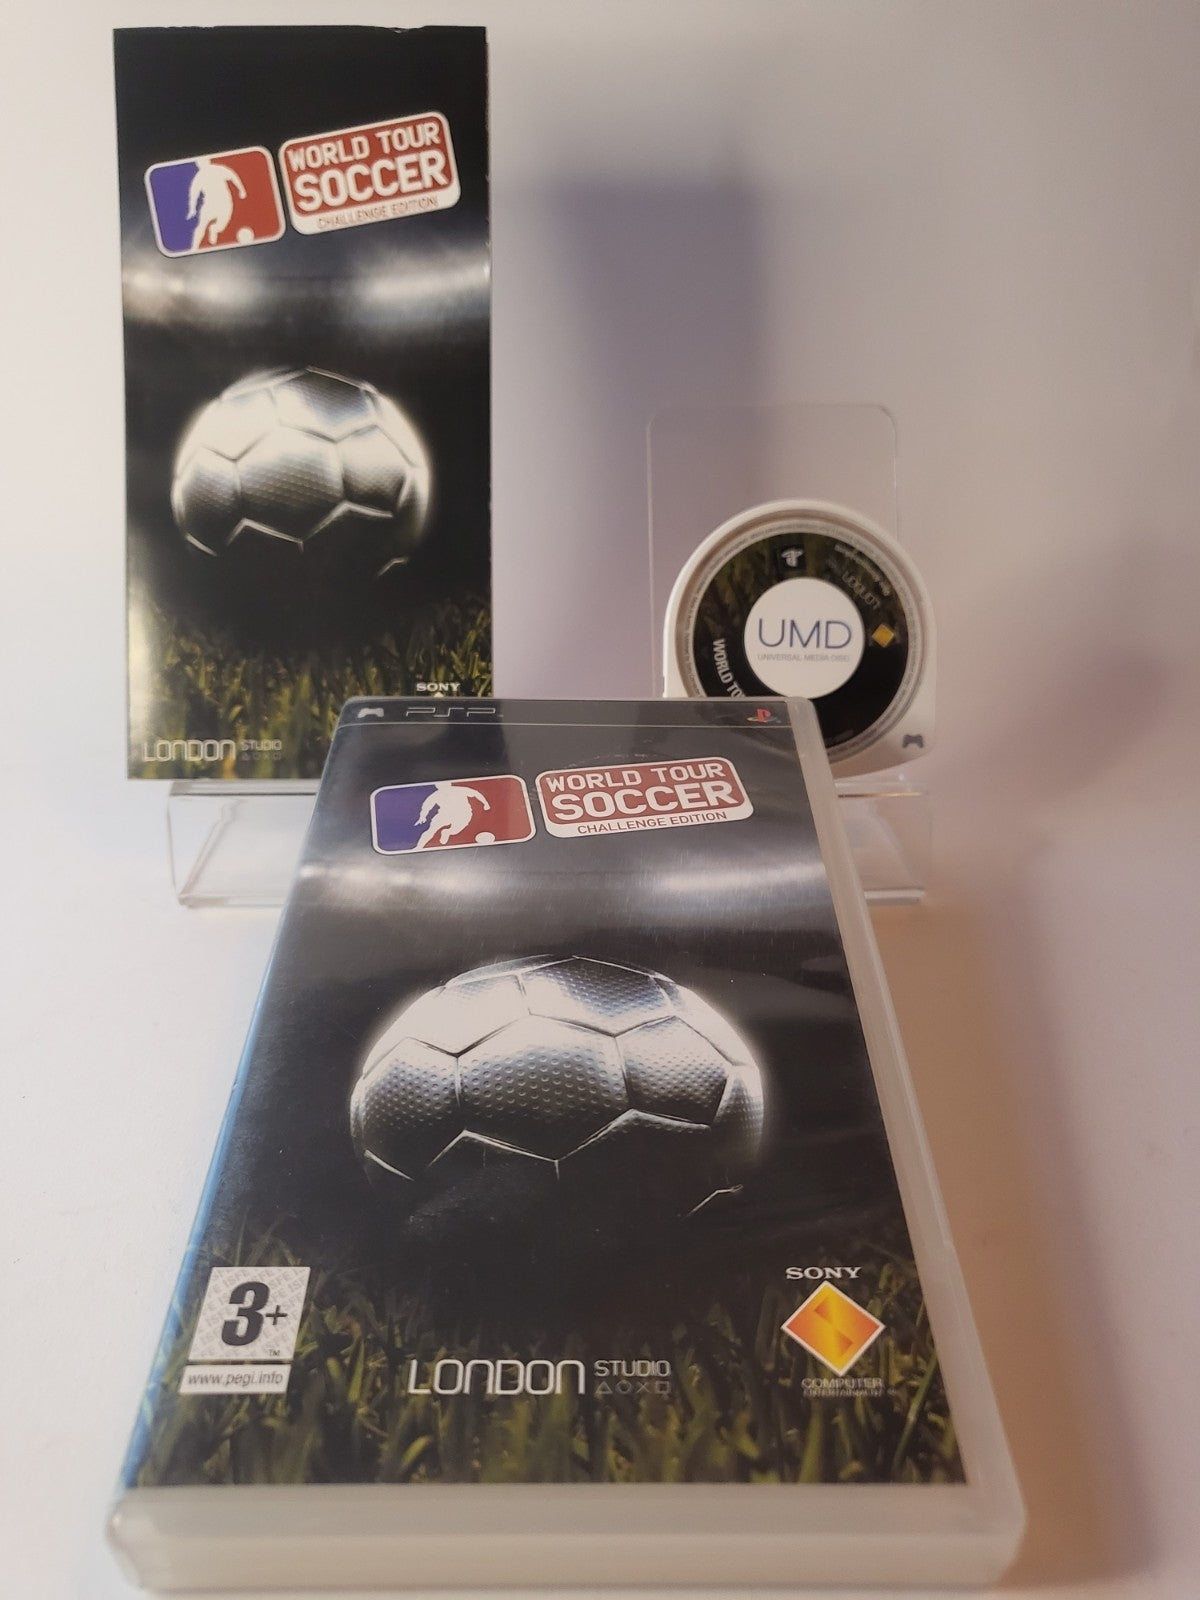 World Tour Soccer: Challenge Edition Playstation Portable